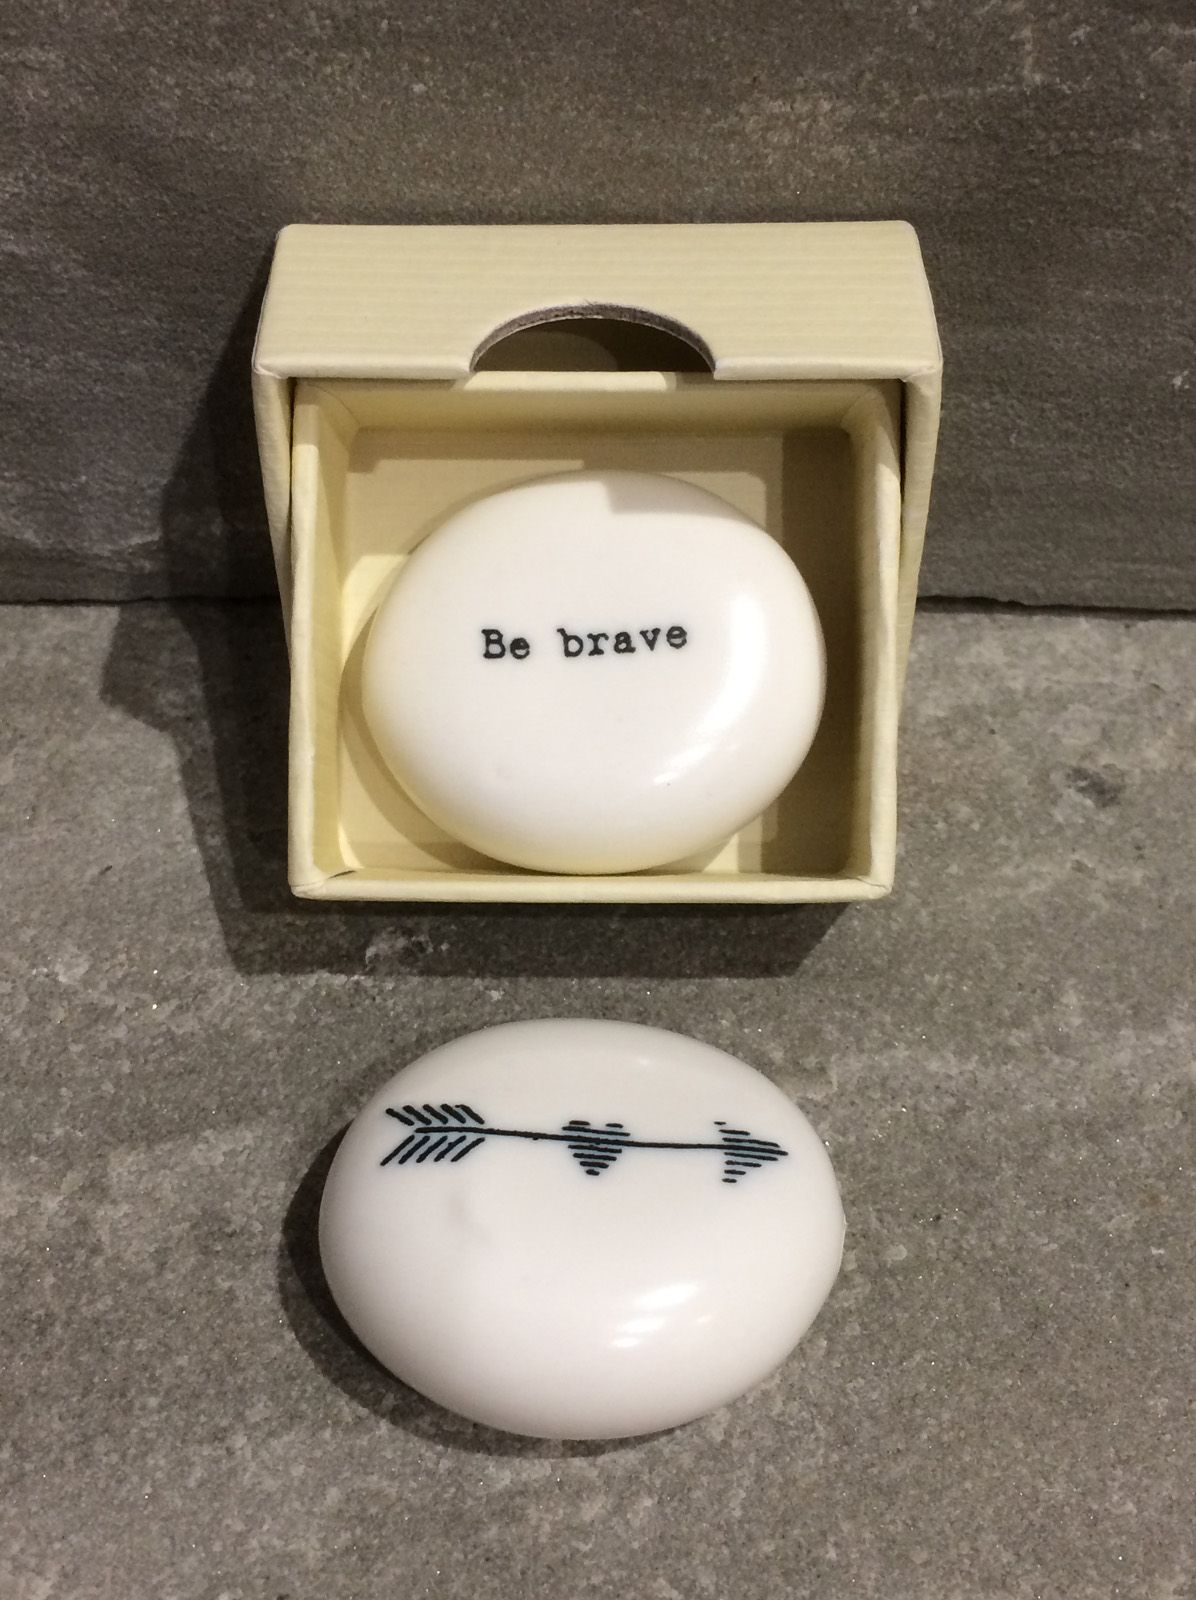 Above: Supportive words on an East Of India ceramic pebble keepsake.